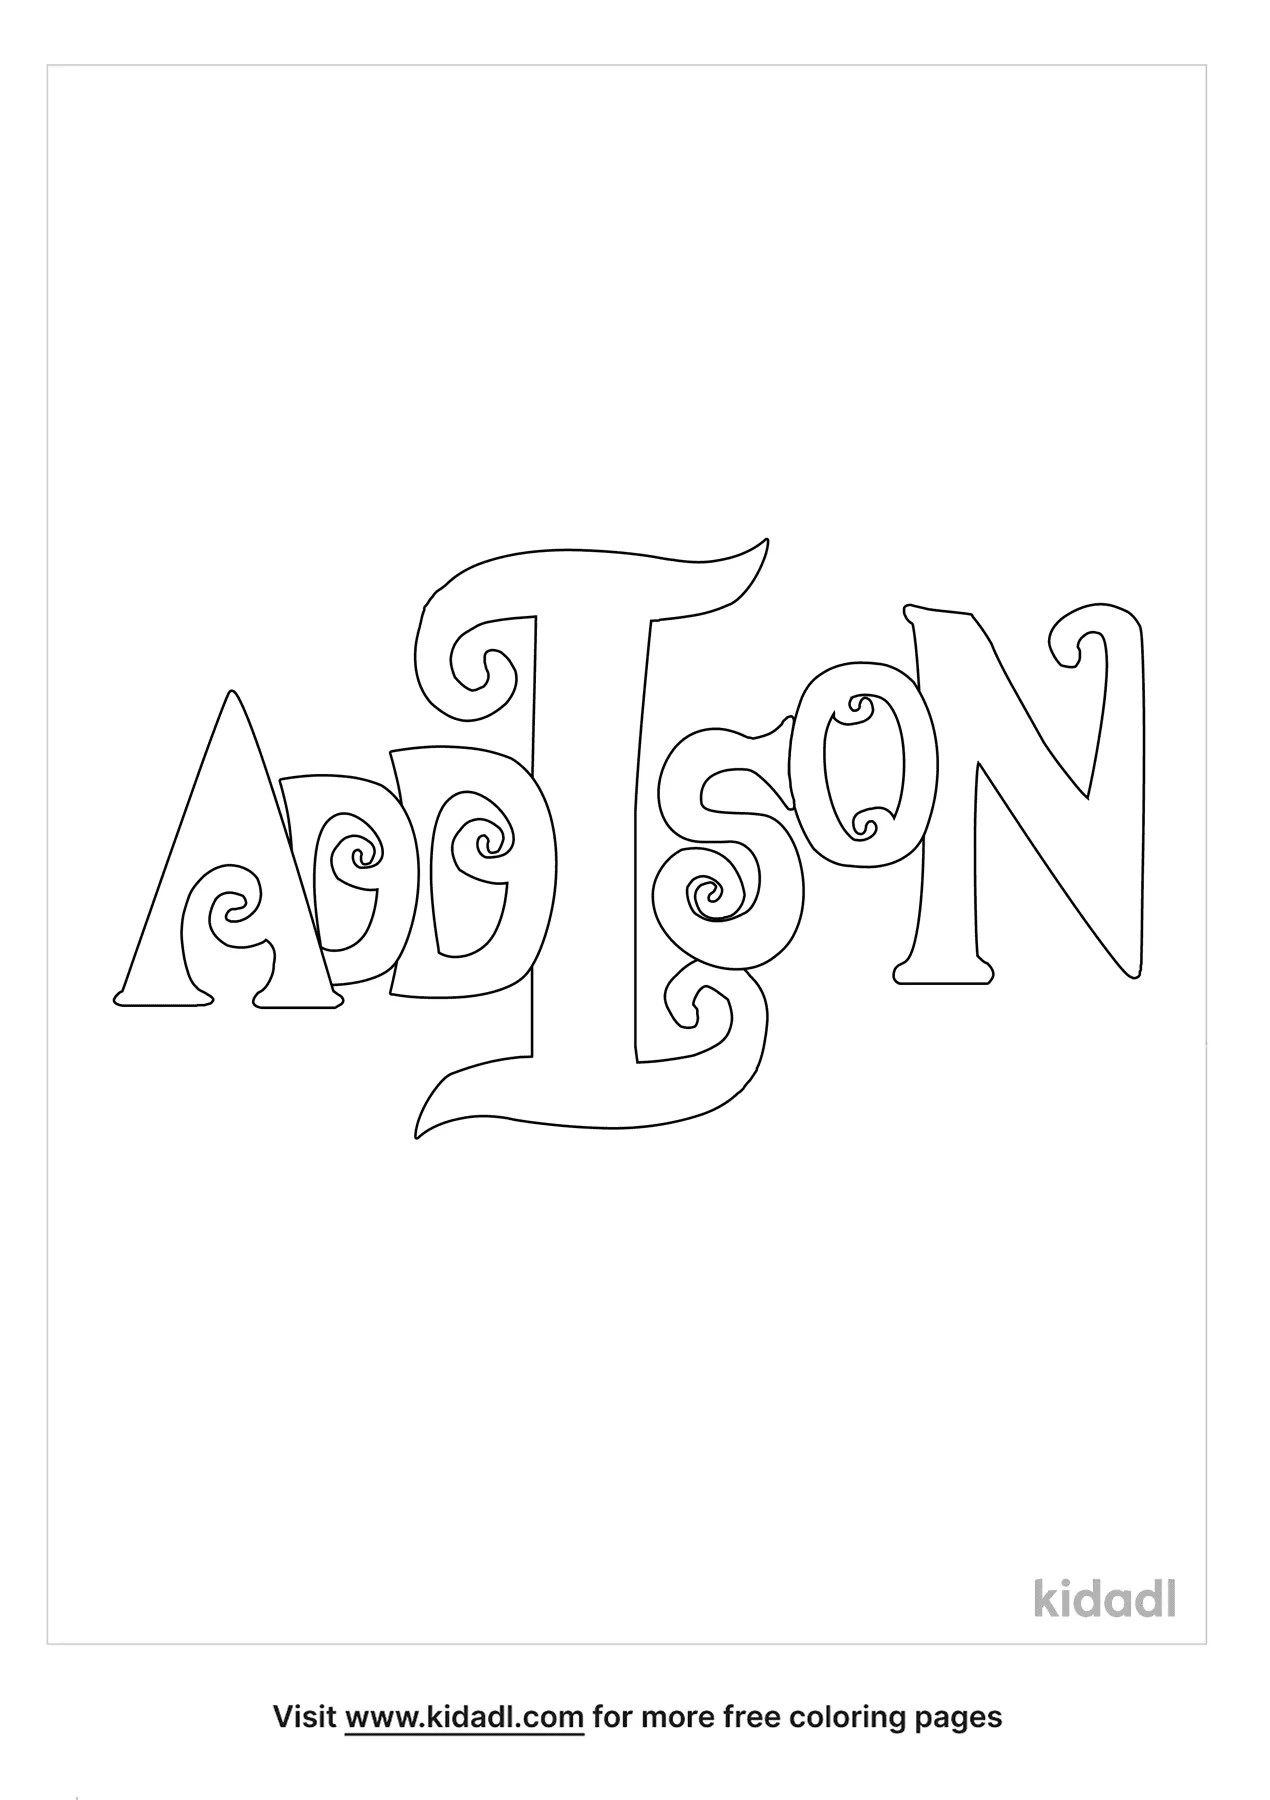 Addison Coloring Page